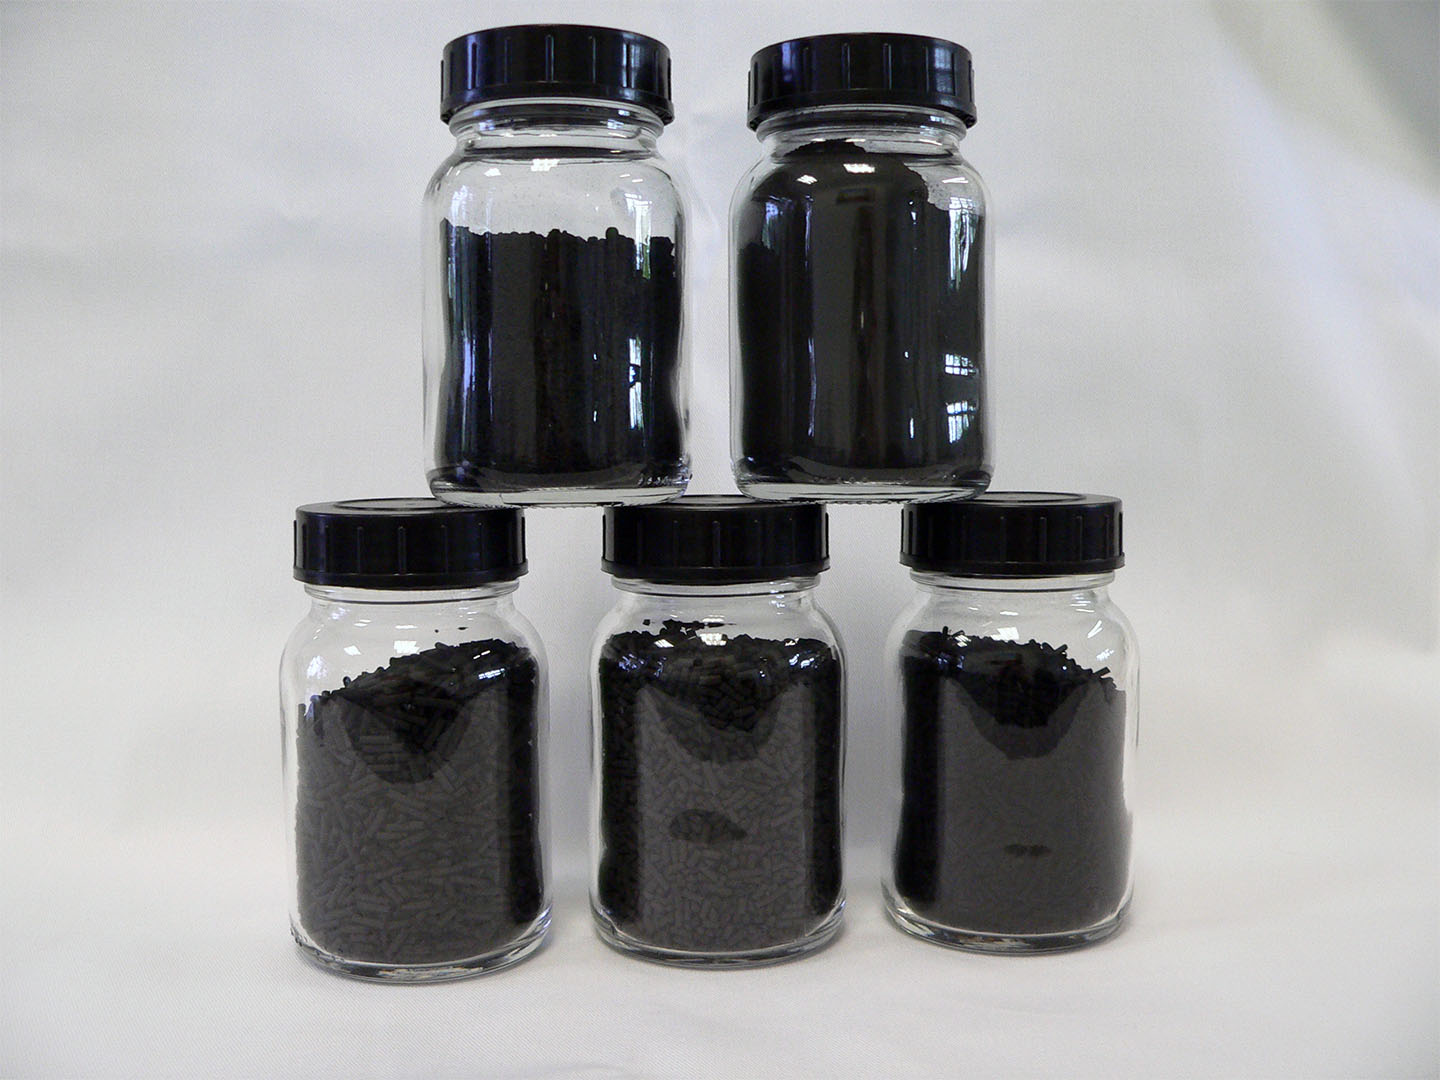 BioSorb: Fraunhofer researchers want to replace activated carbon with protein-based, renewable raw materials.